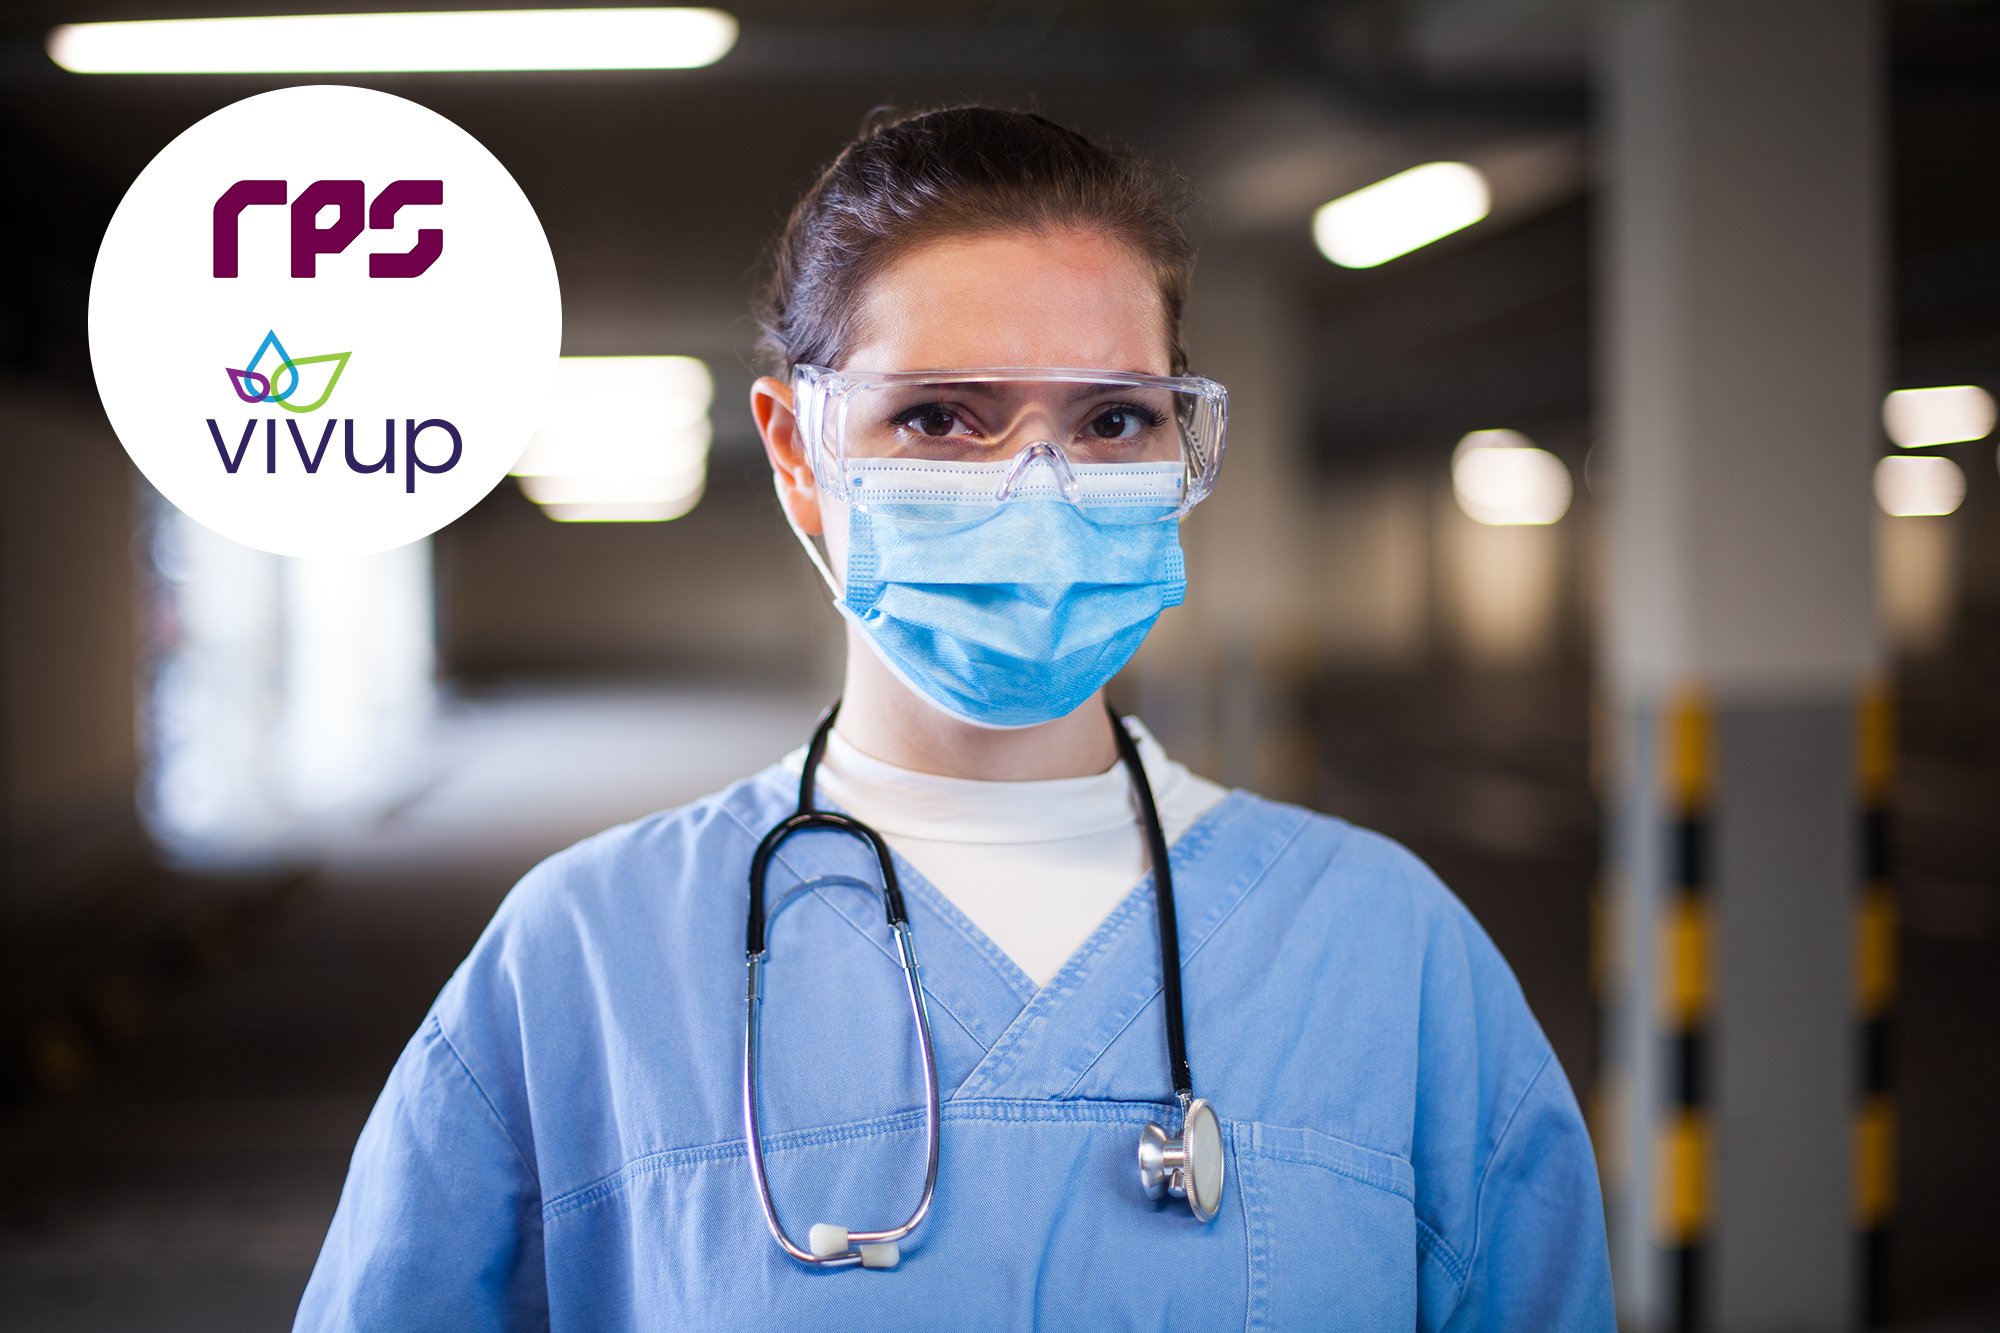 RPS and Vivup logos next to a doctor wearing a face mask and goggles